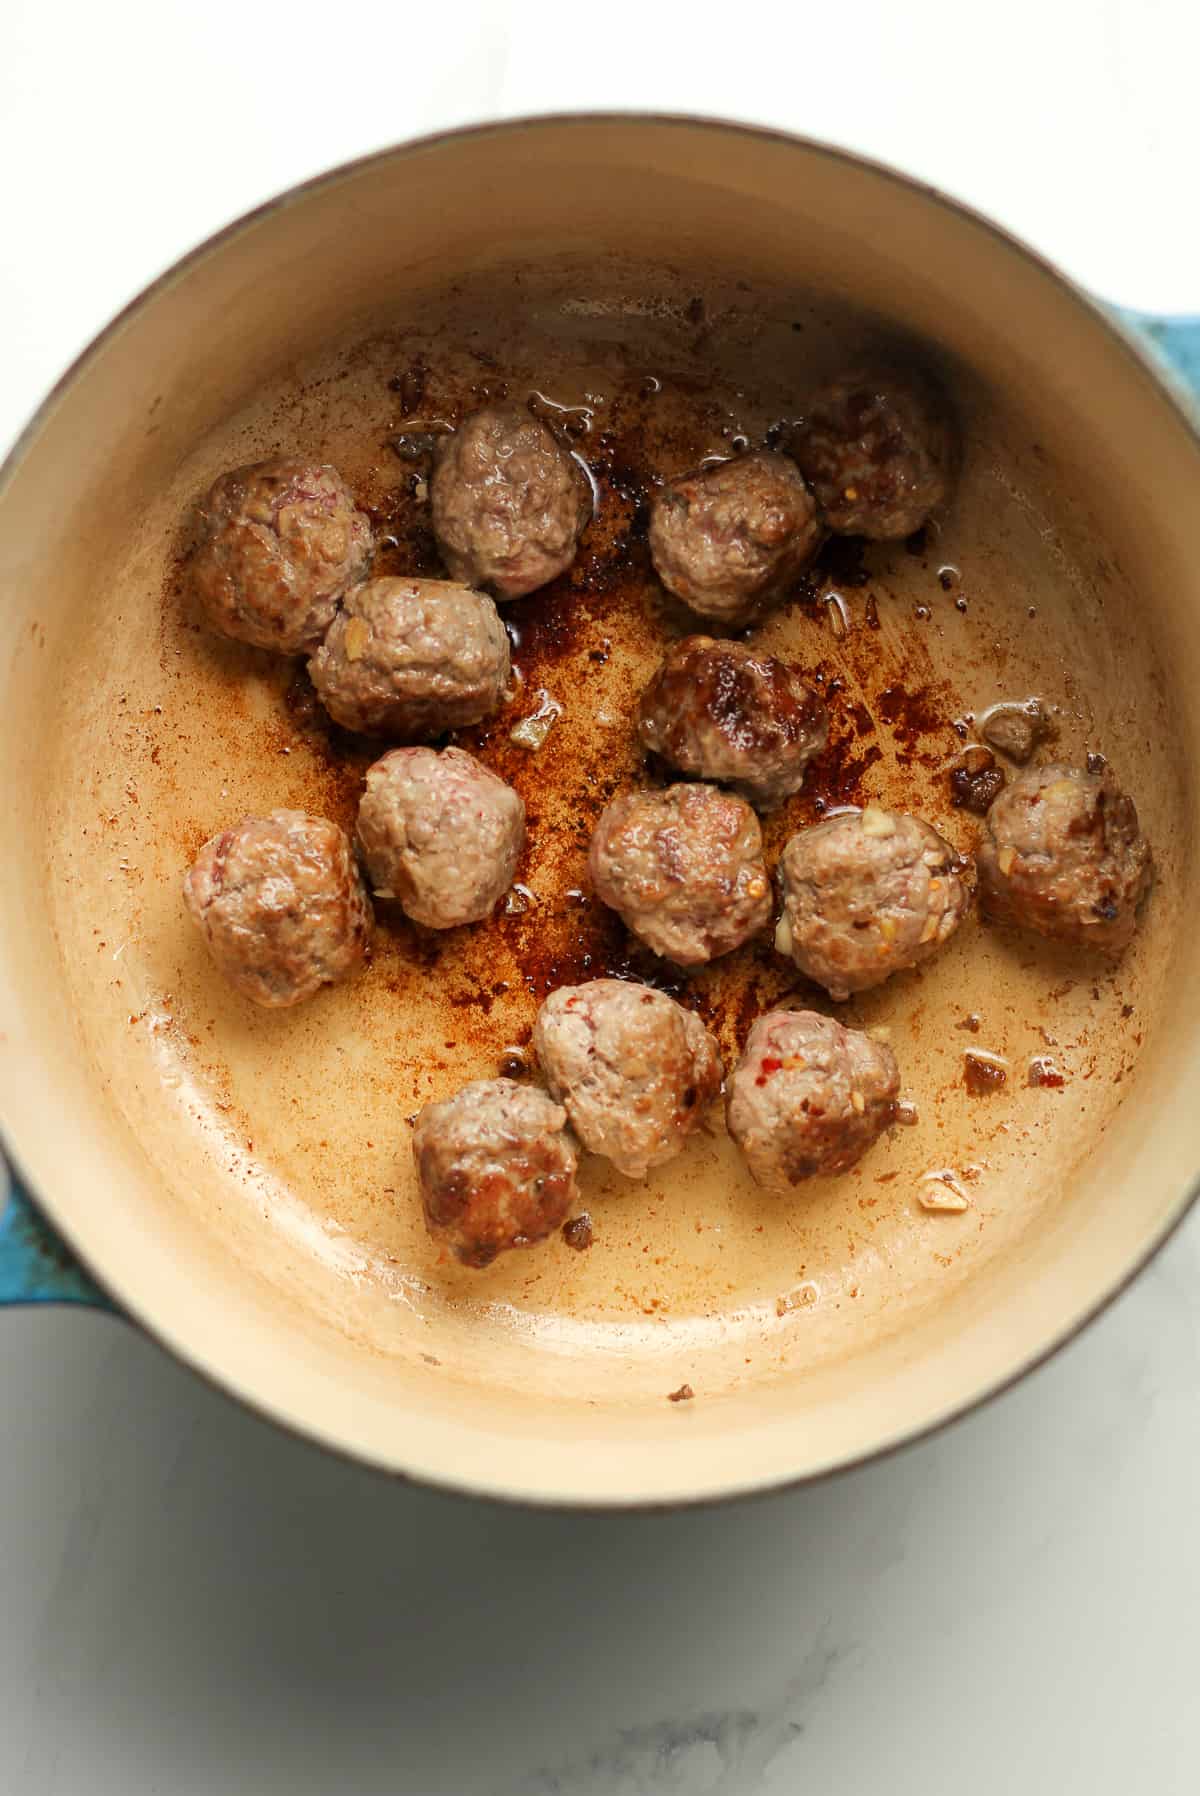 A stock pot of the browned meatballs.